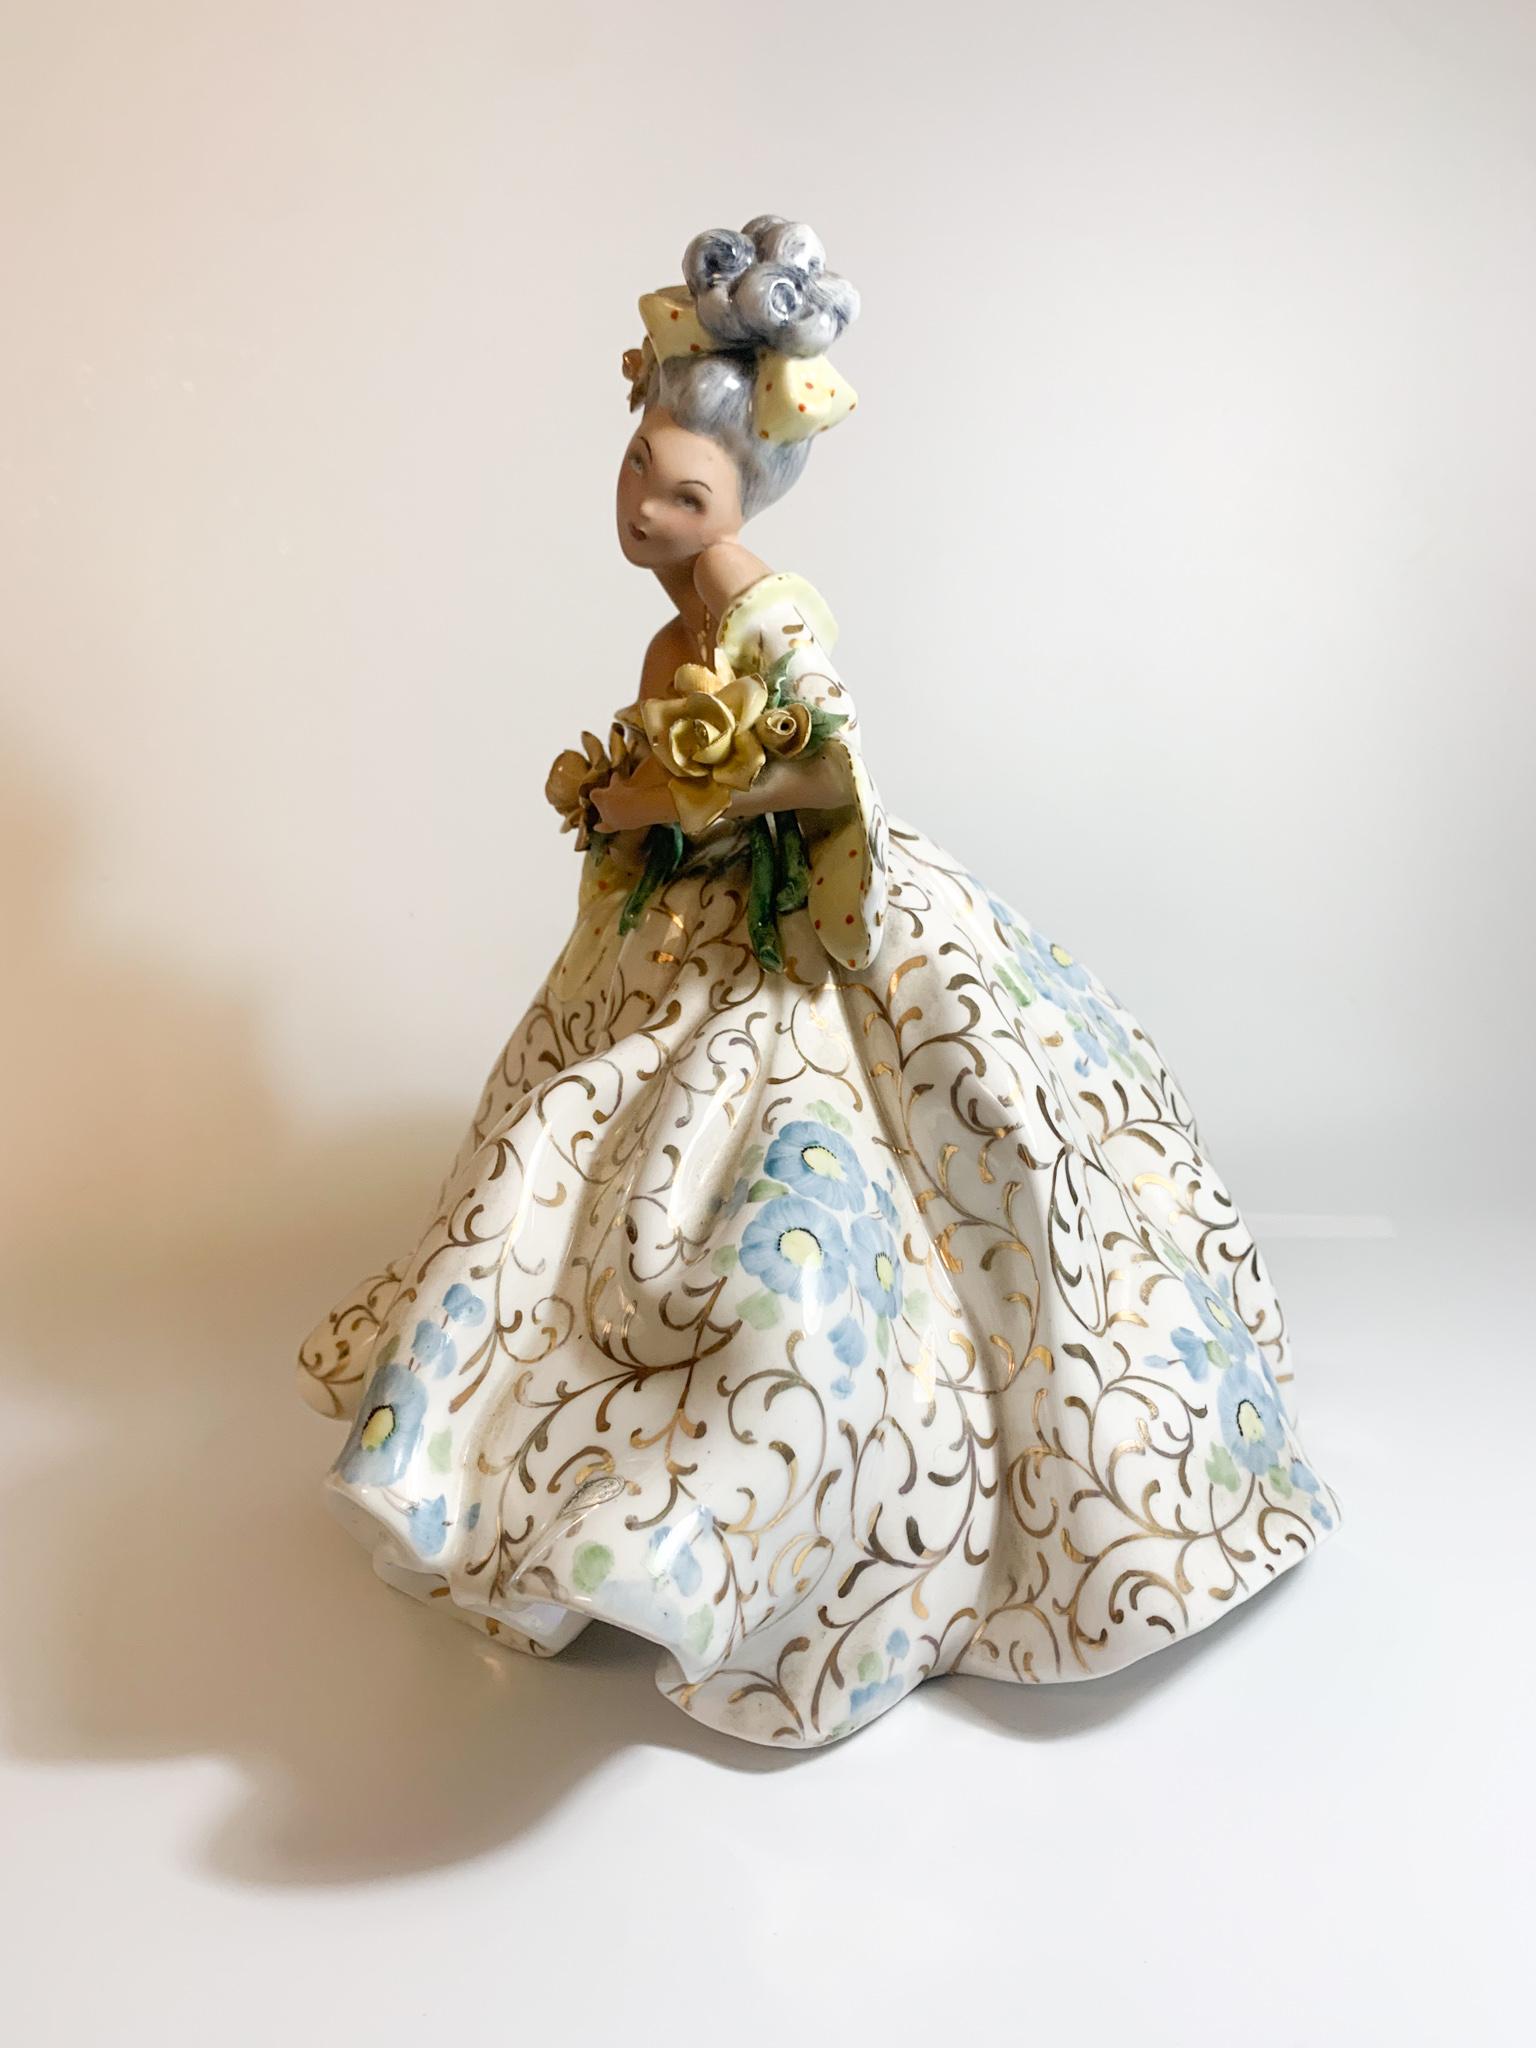 Ceramic Statue of a Lady with Iridescent Details by Tiziano Galli from the 1950s For Sale 3